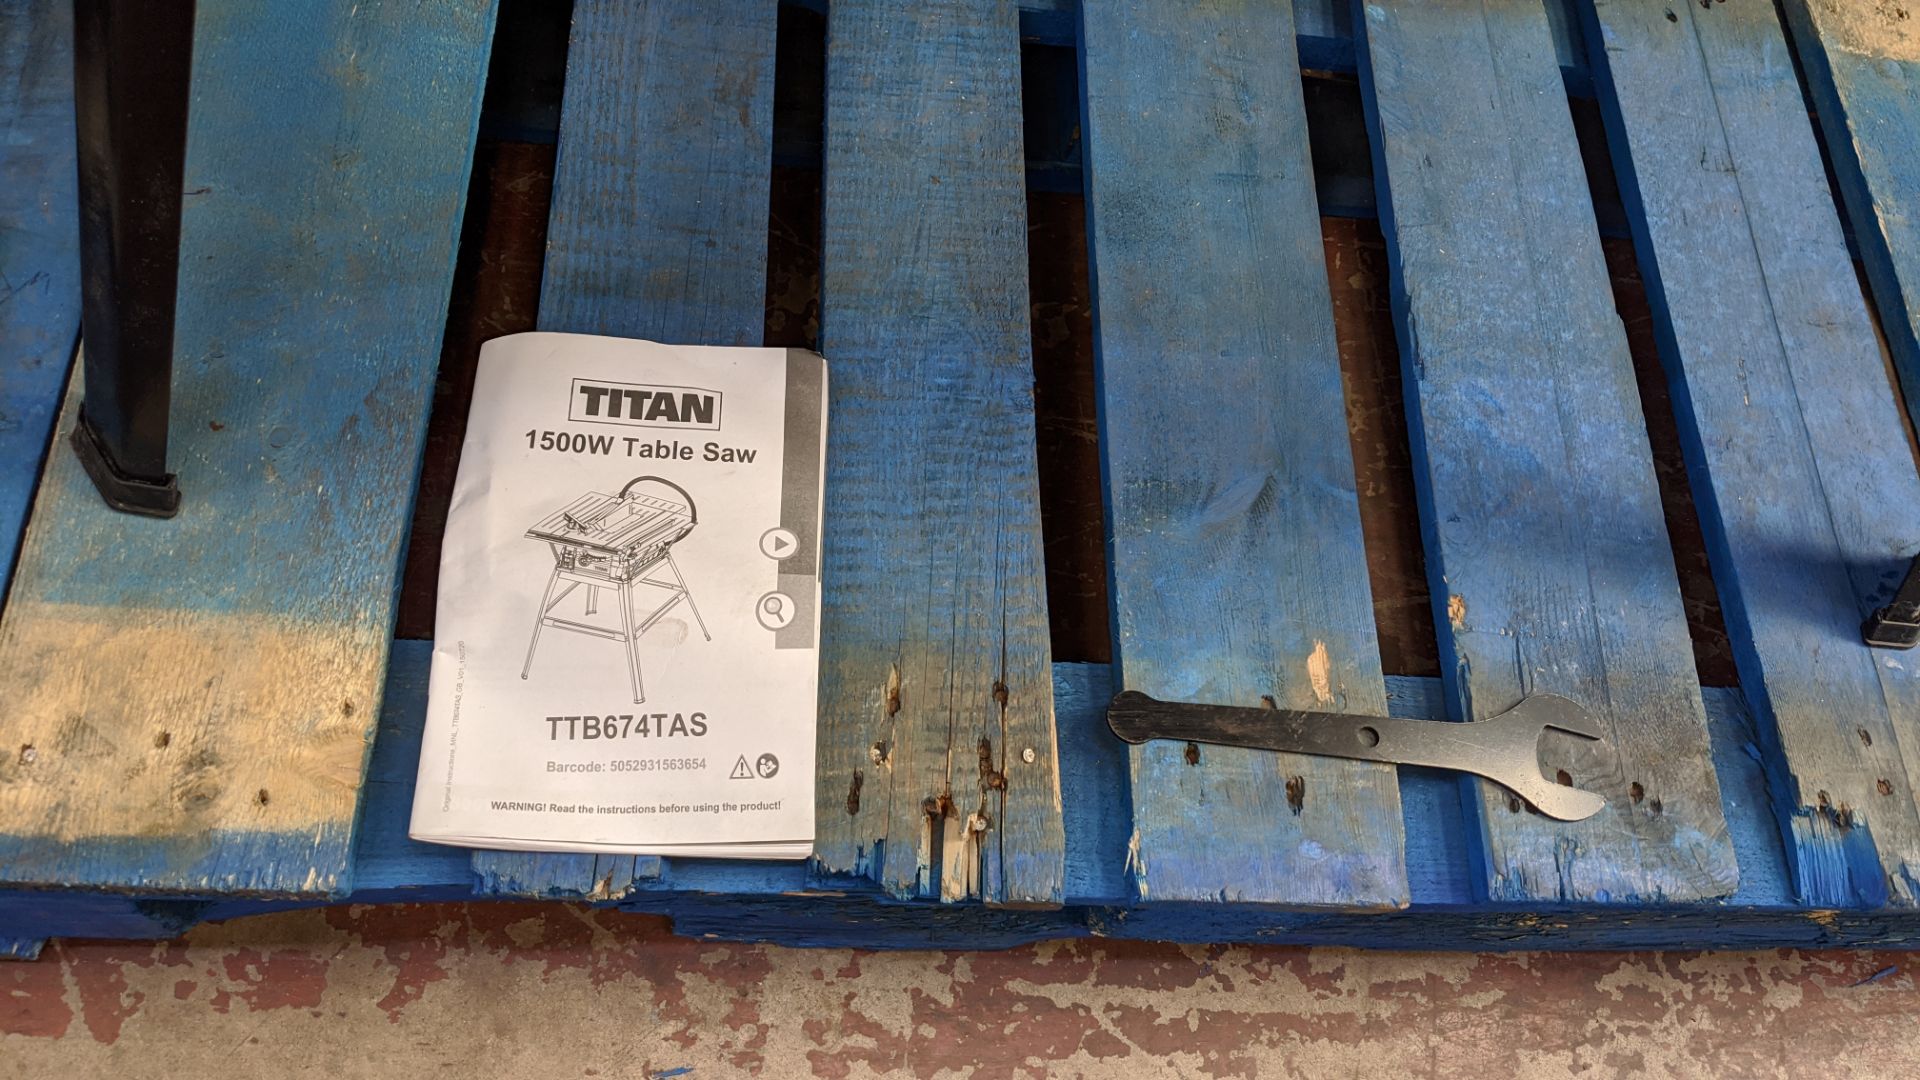 Titan 1500w table saw model TTB674TAS. Lots 22 - 53 are all located inside our warehouse. Please - Image 6 of 7